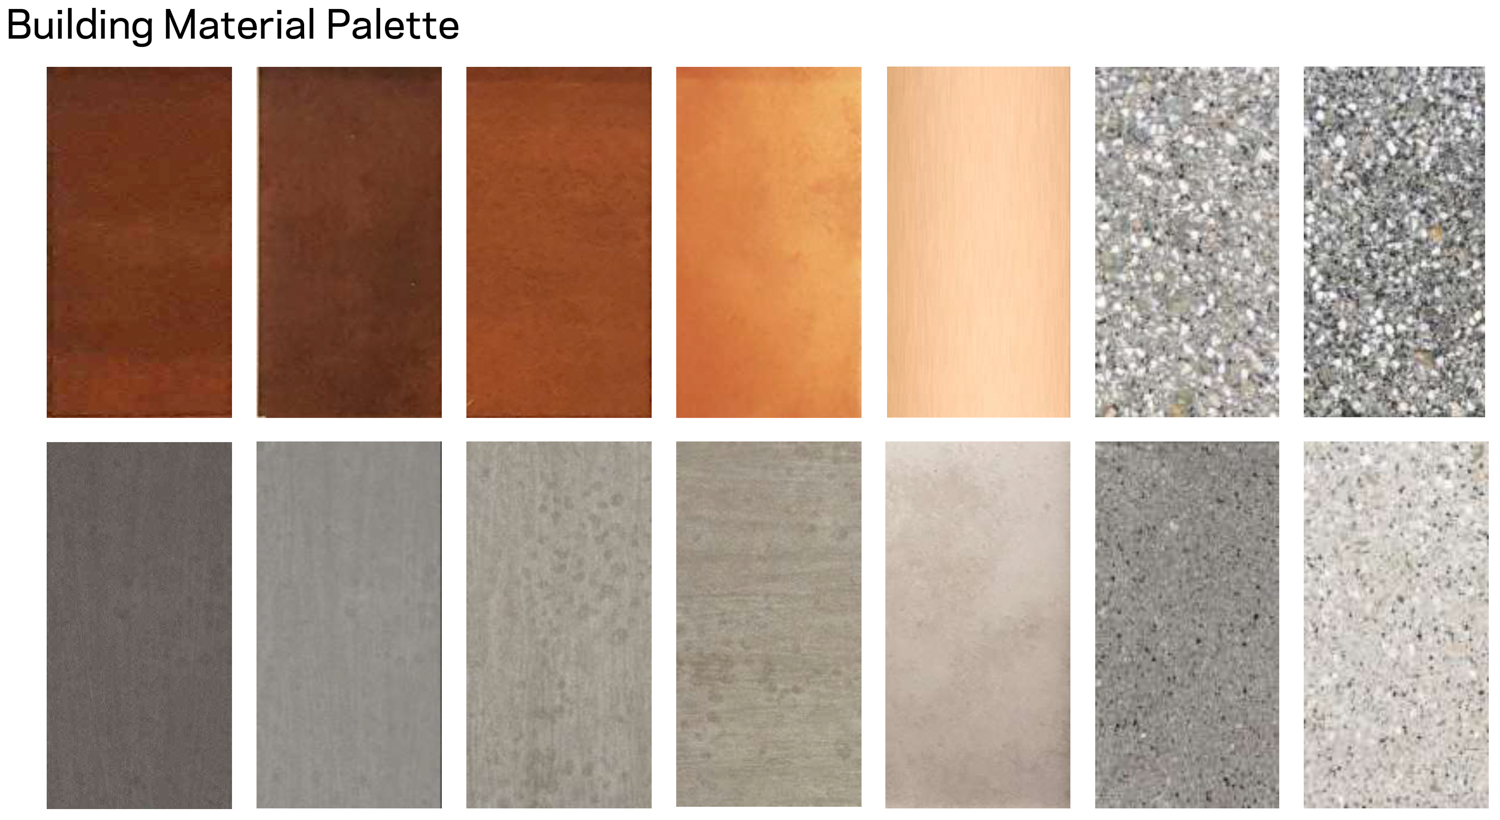 725 Harrison Street building material palette, with various grey, brown, and brass tones, design by HOK Architects